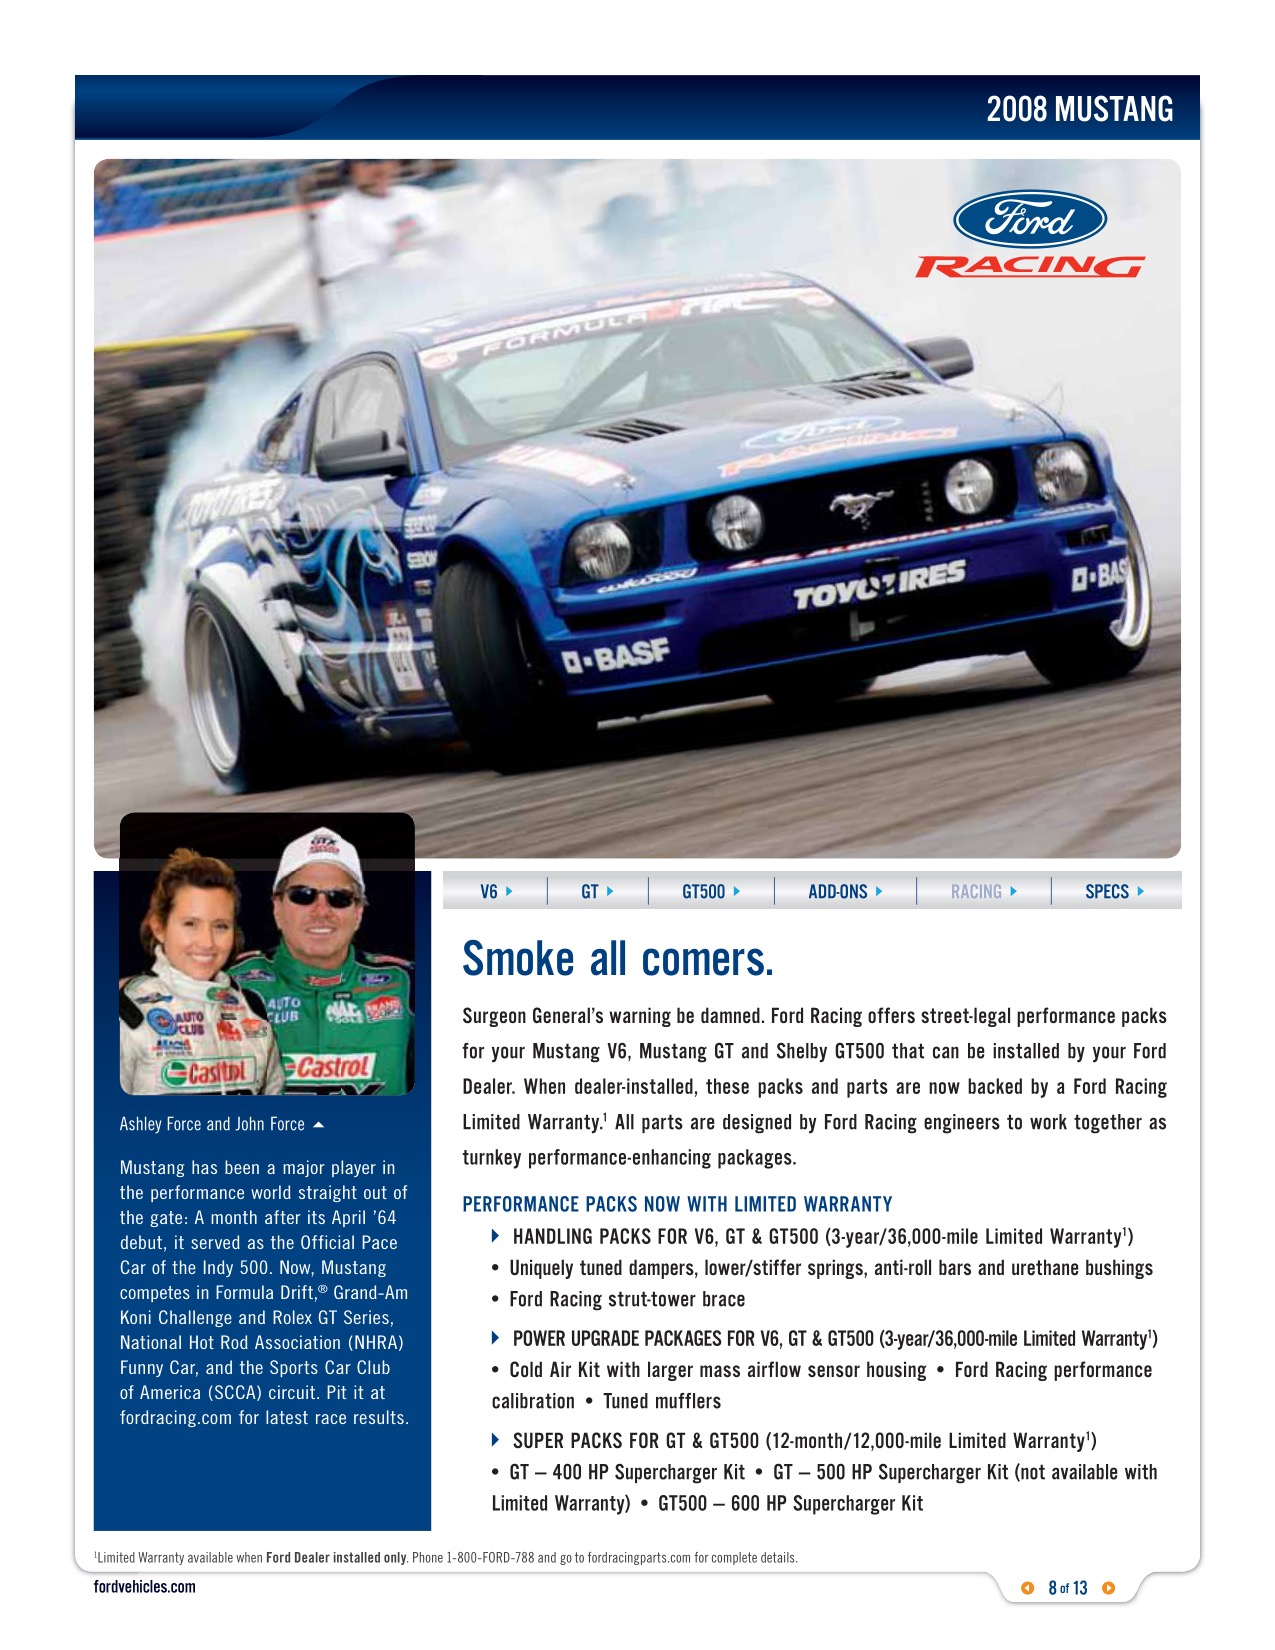 2008 Ford Mustang Brochure Page 6